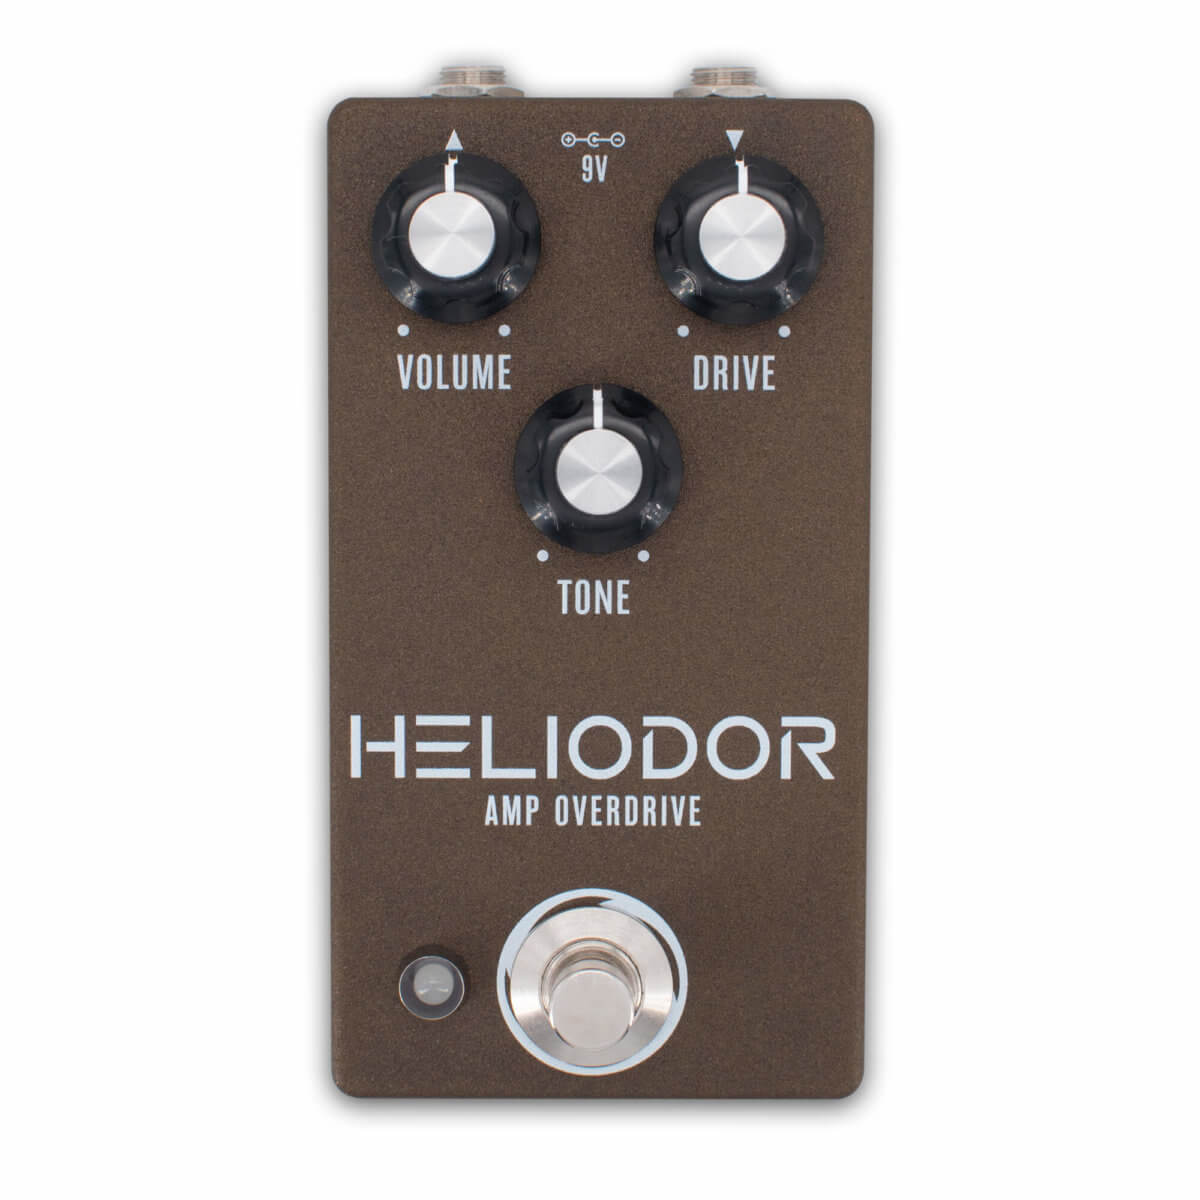 Heliodor Amp Overdrive / BOSS® OD-3 Overdrive - Aion FX